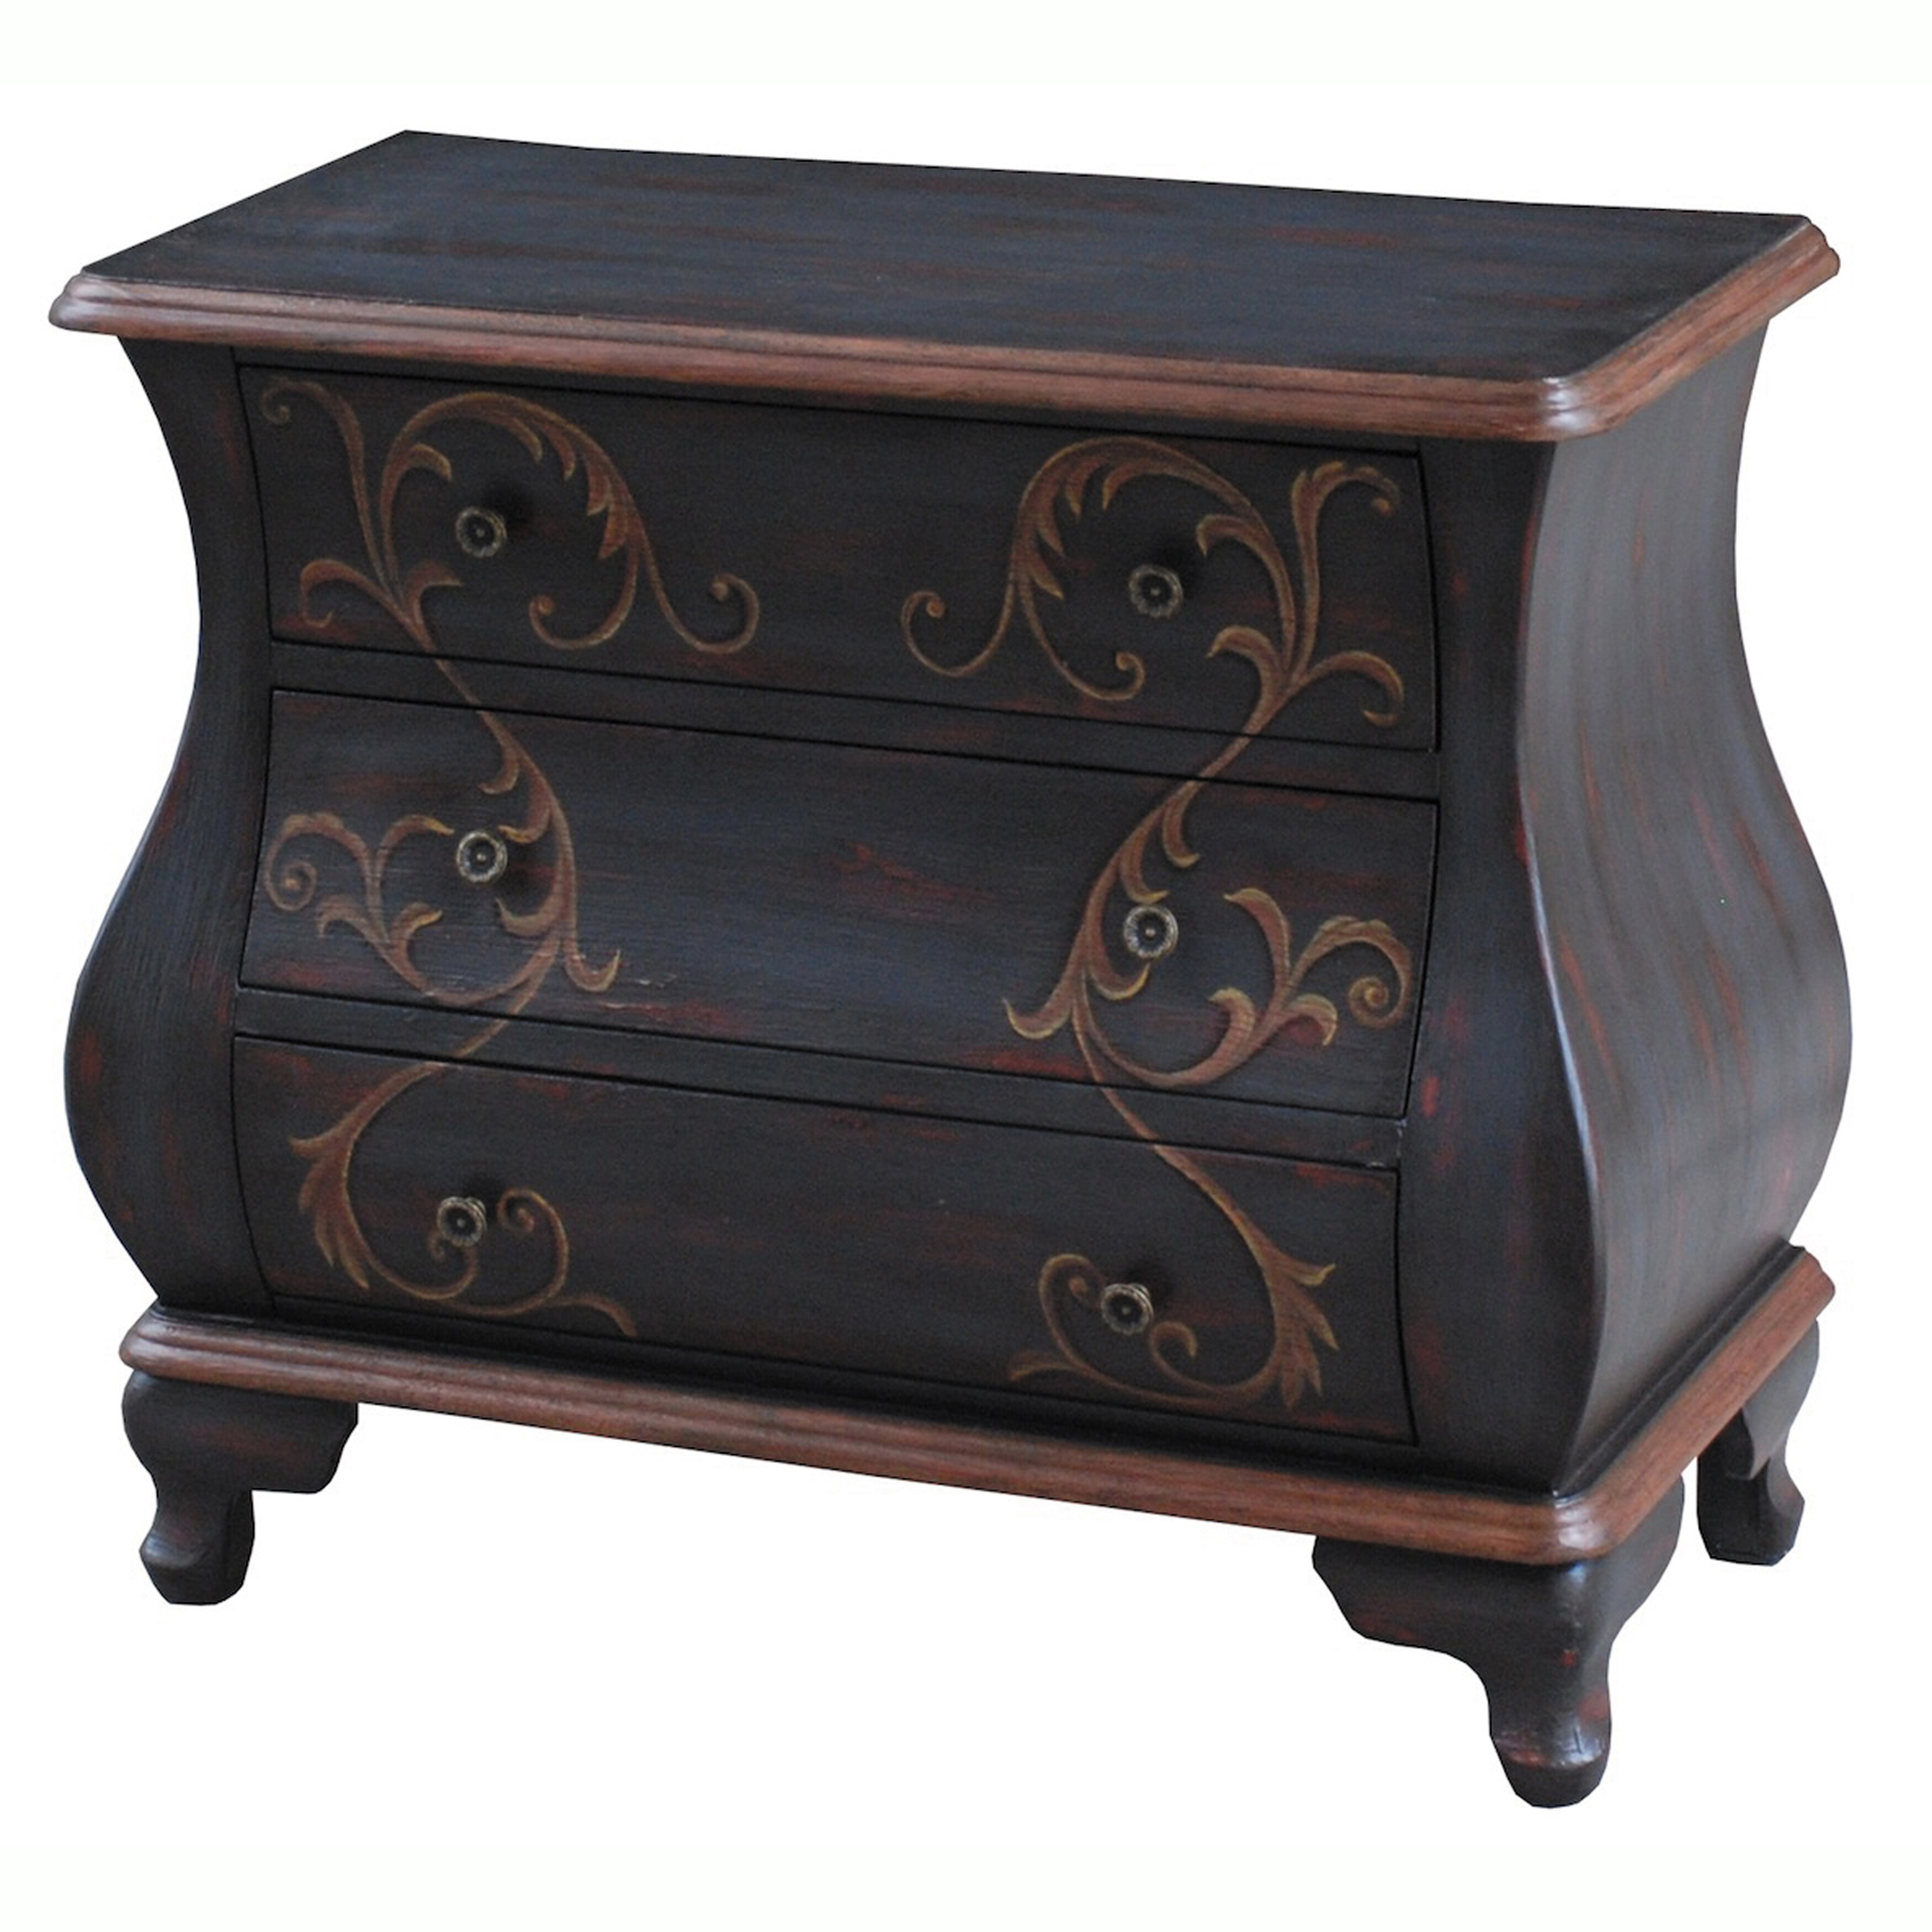 Hand painted Distressed Dark Brown Finish Bombay Accent Chest